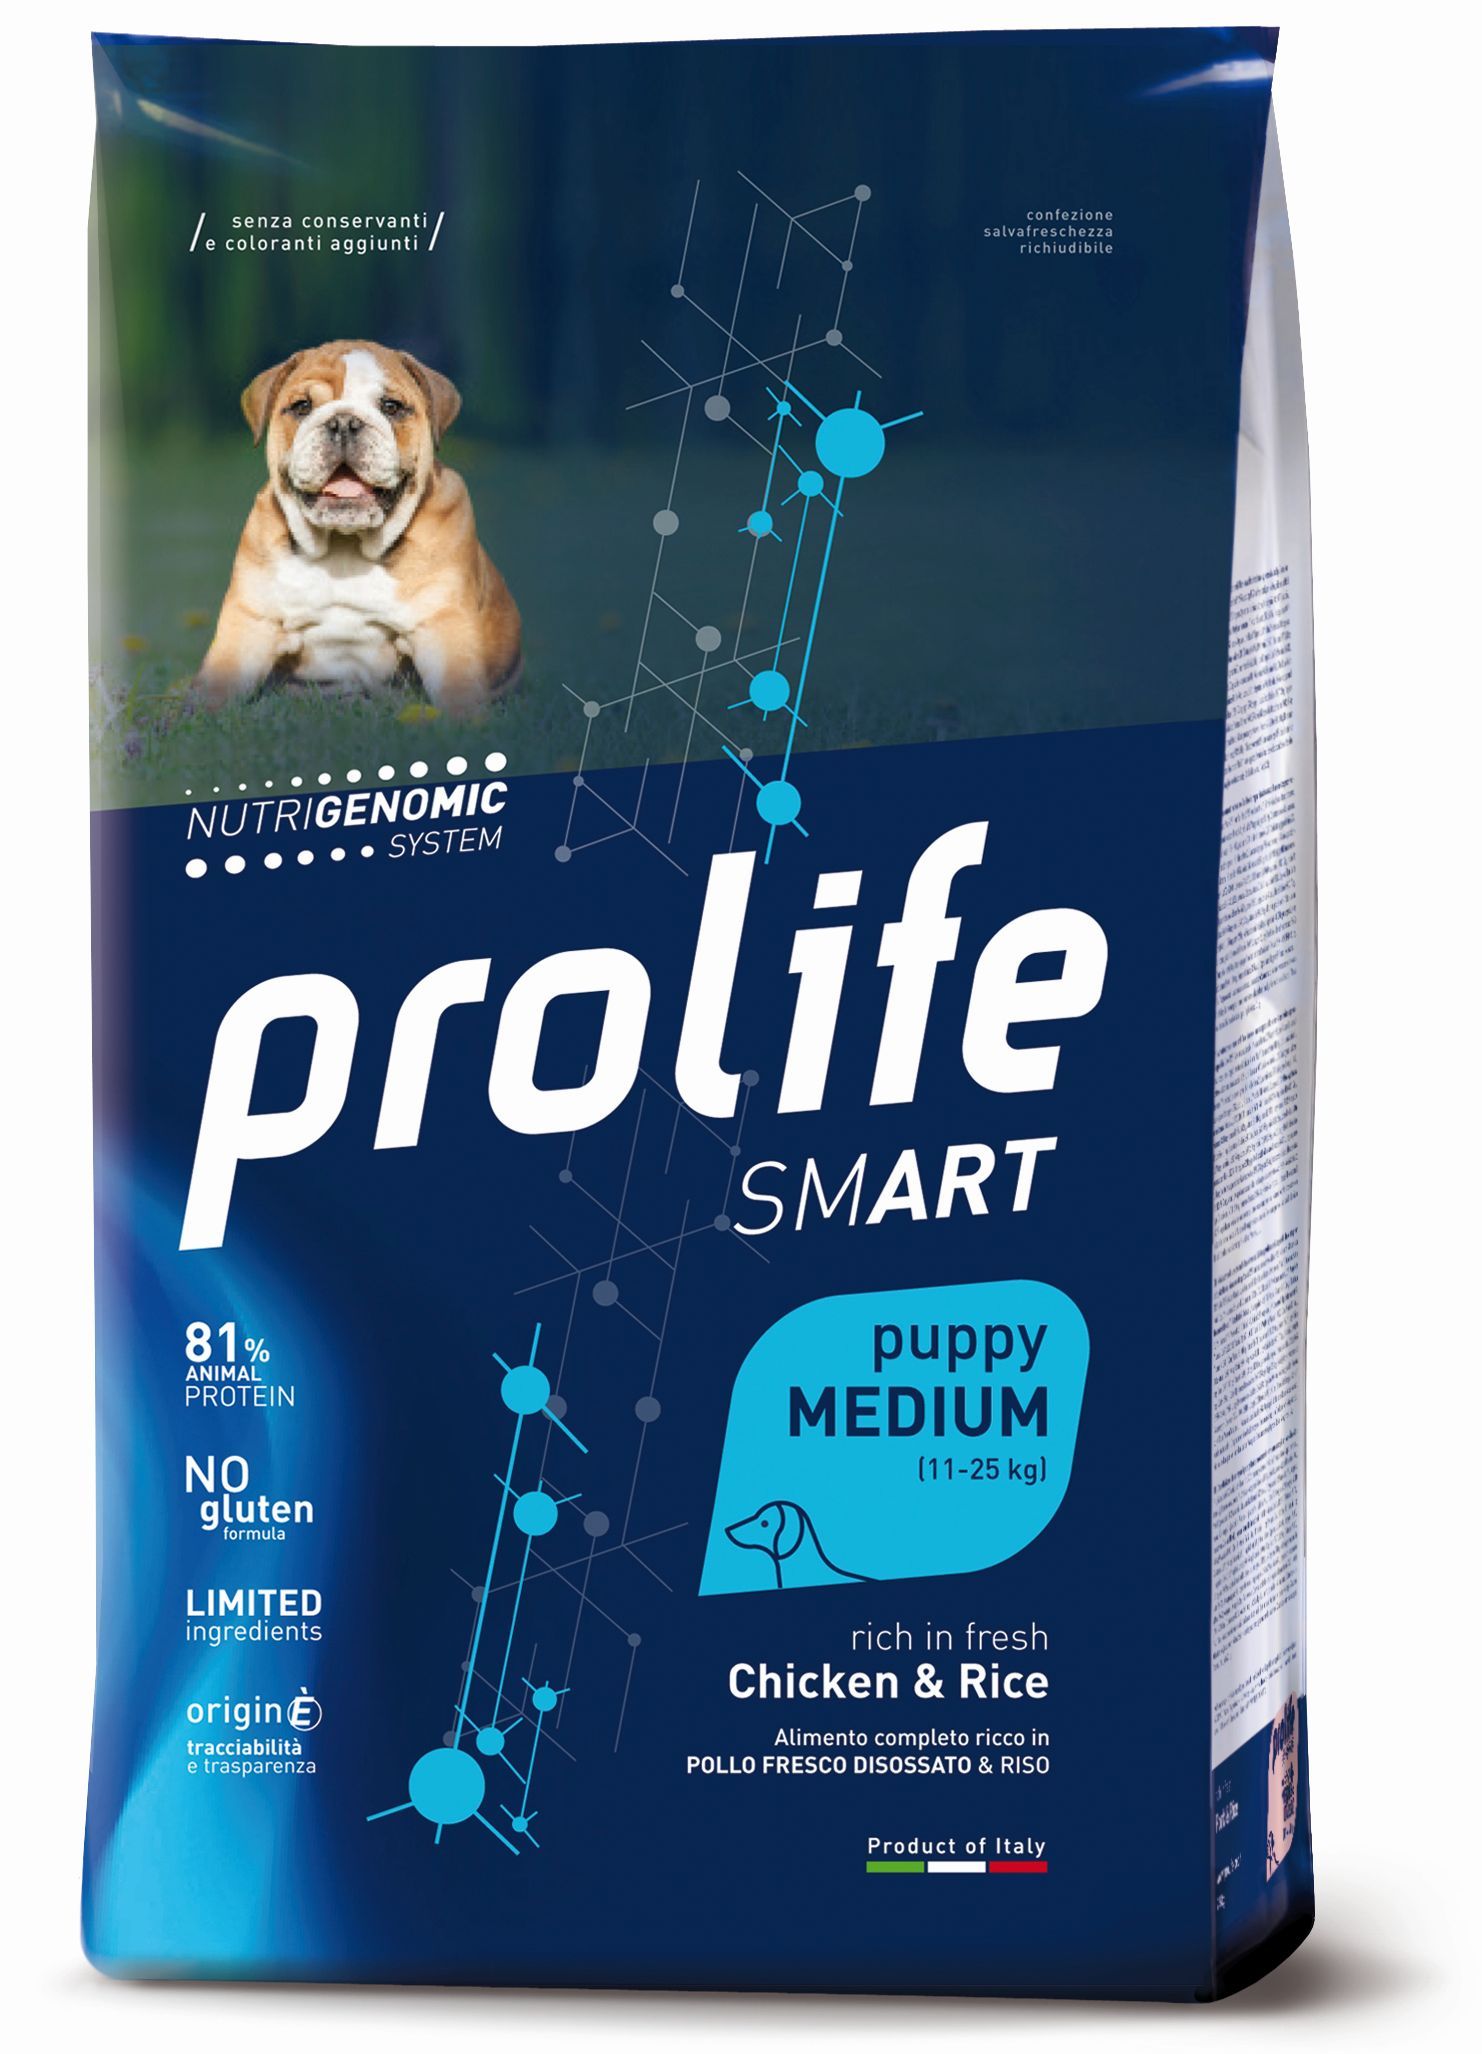 Complete dietetic pet food for medium and large adult dogs, formulated to reduce excess body weight.
